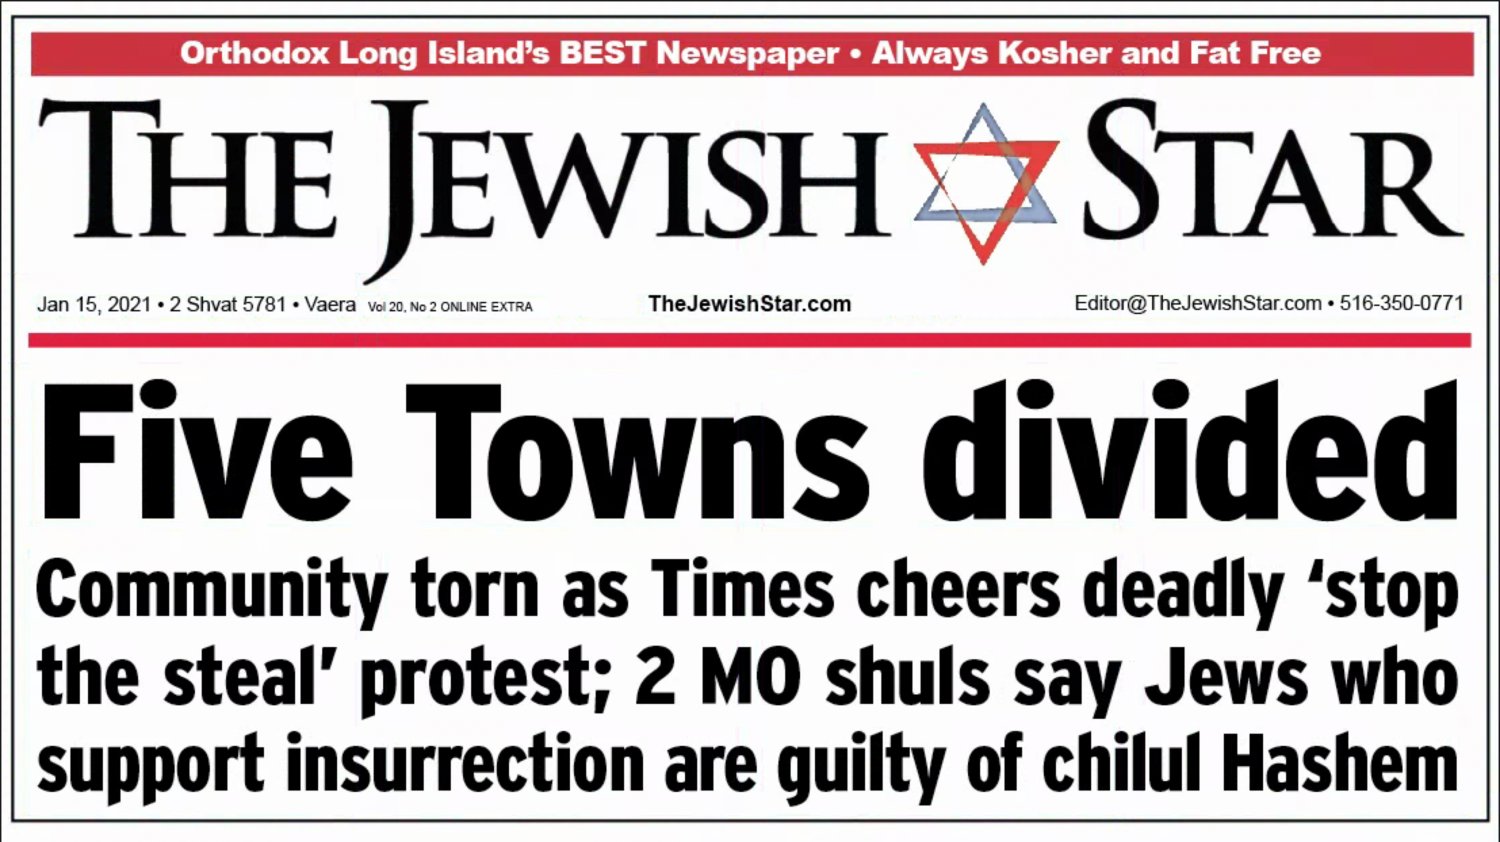 Here's what The Jewish Star's front might might have looked like last week. As pre-scheduled, the Star skips two weeks of publication in January, returning B"H on Jan. 21.